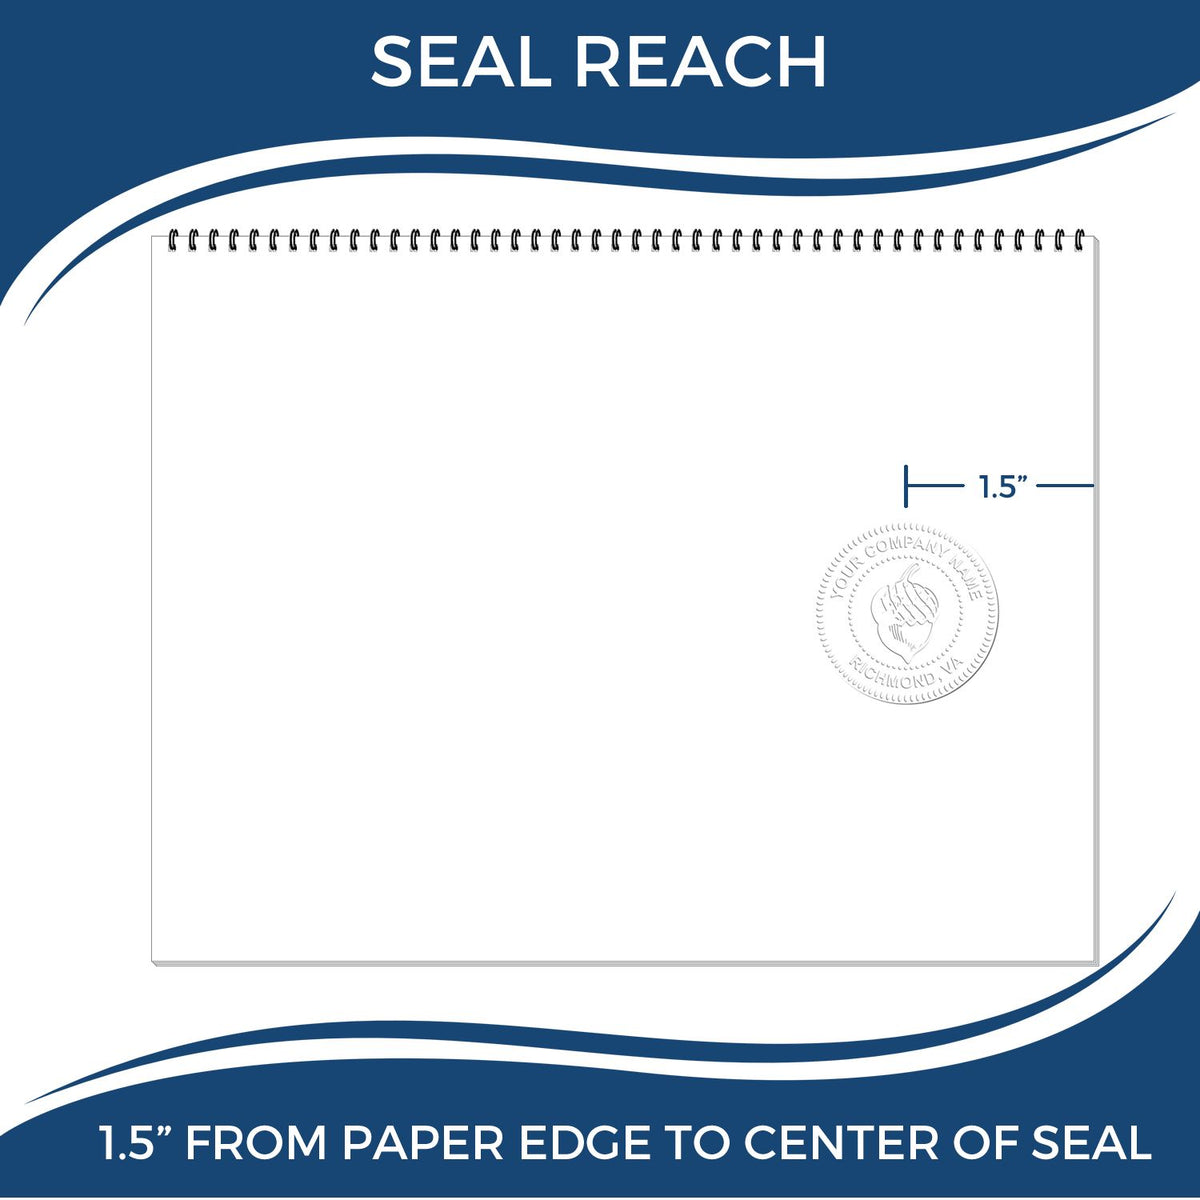 An infographic showing the seal reach which is represented by a ruler and a miniature seal image of the Hybrid Montana Landscape Architect Seal